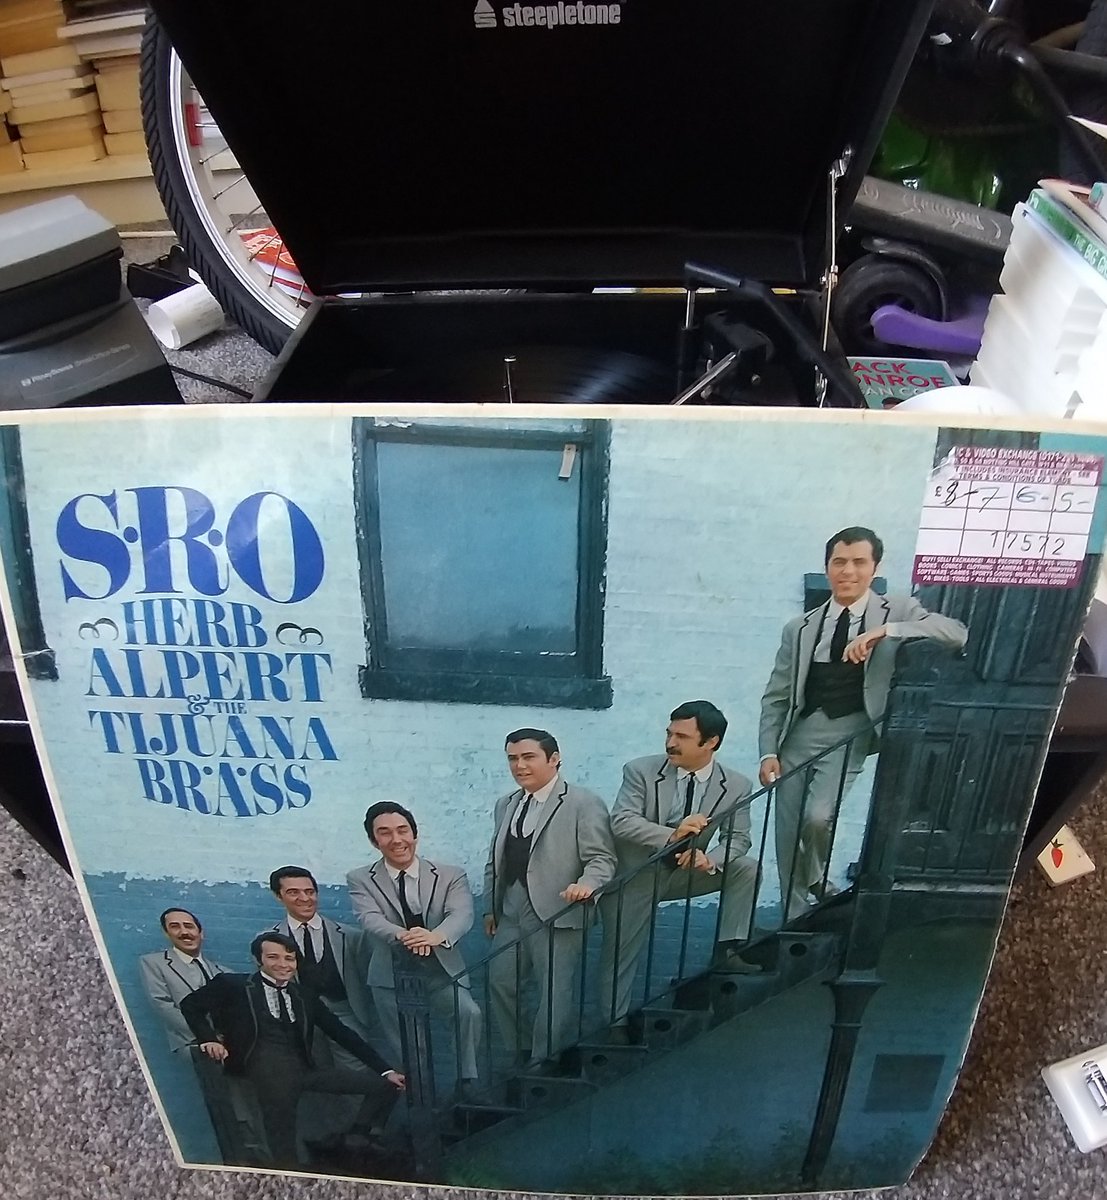 Music in the shop today is from the absolute classic album SRO (standing room only), by Herb Alpert and the Tijuana Brass.